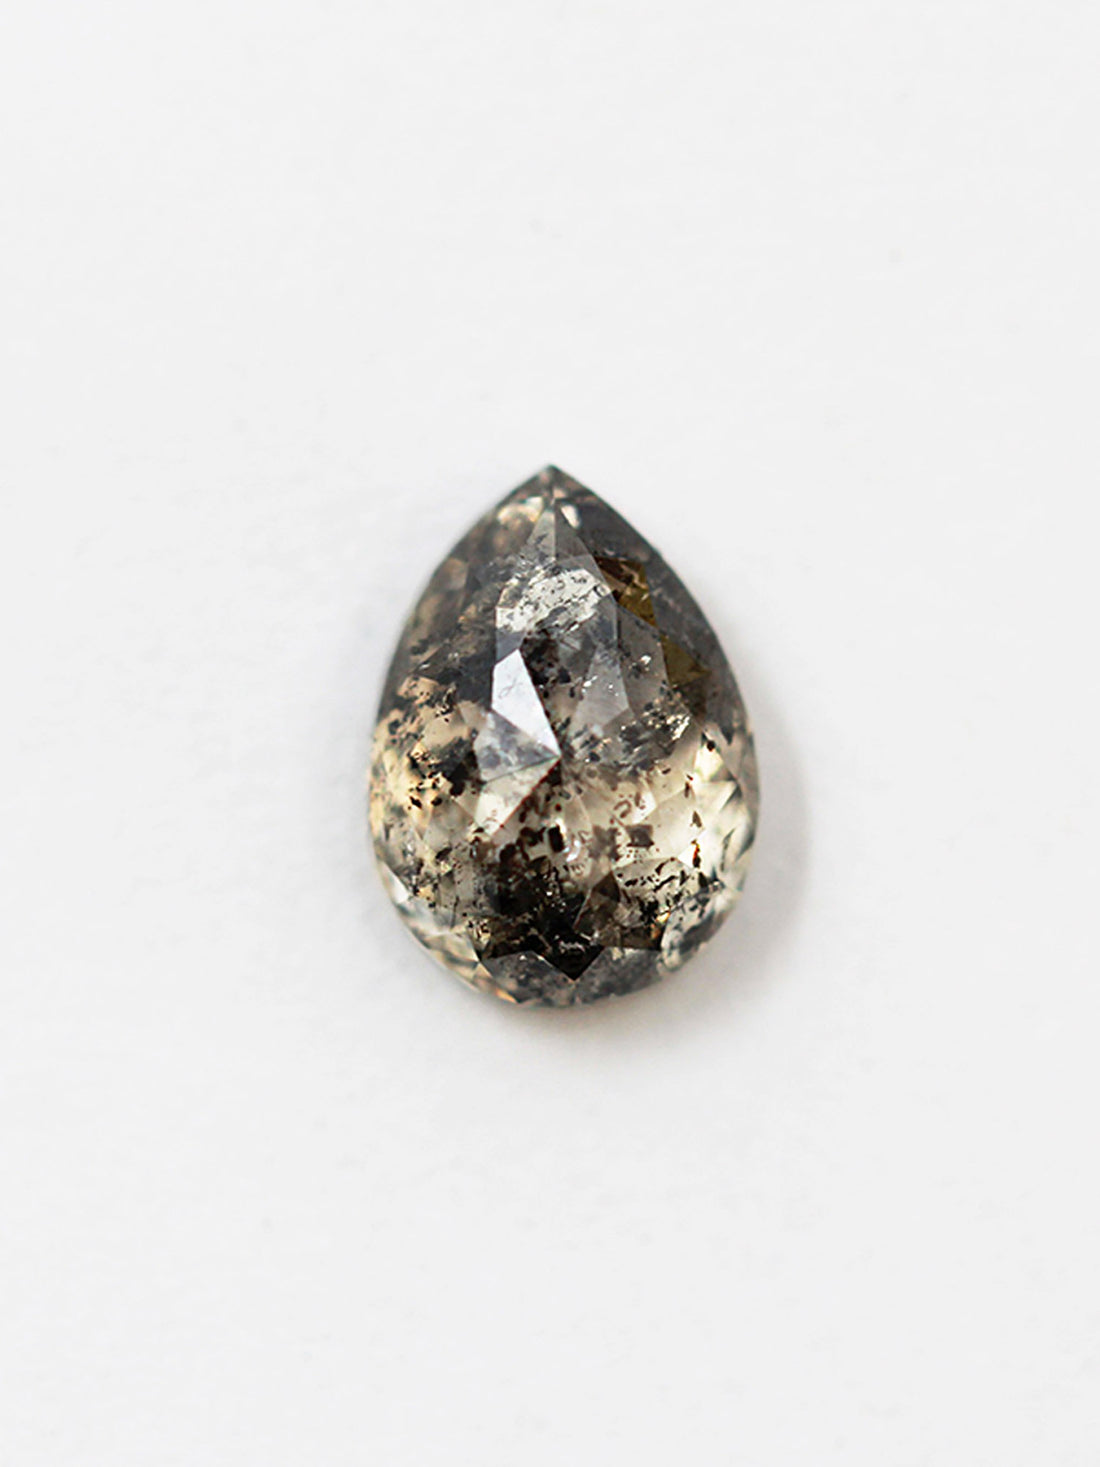 1.53CT Salt and Pepper Pear Inventory SKU SPPEAR-03